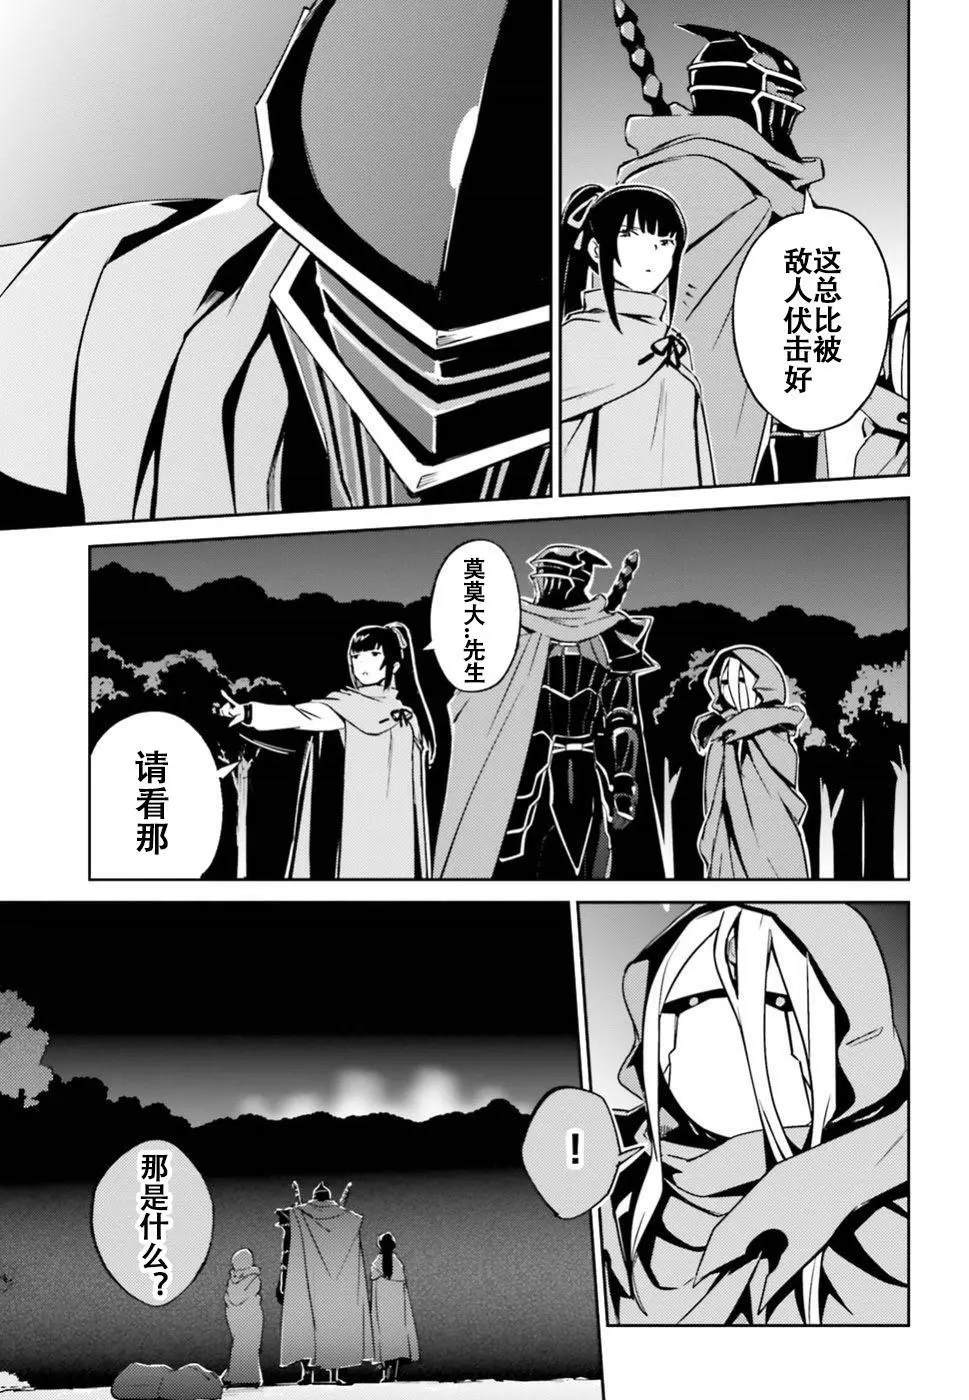 OVERLORD - 第47話 - 1